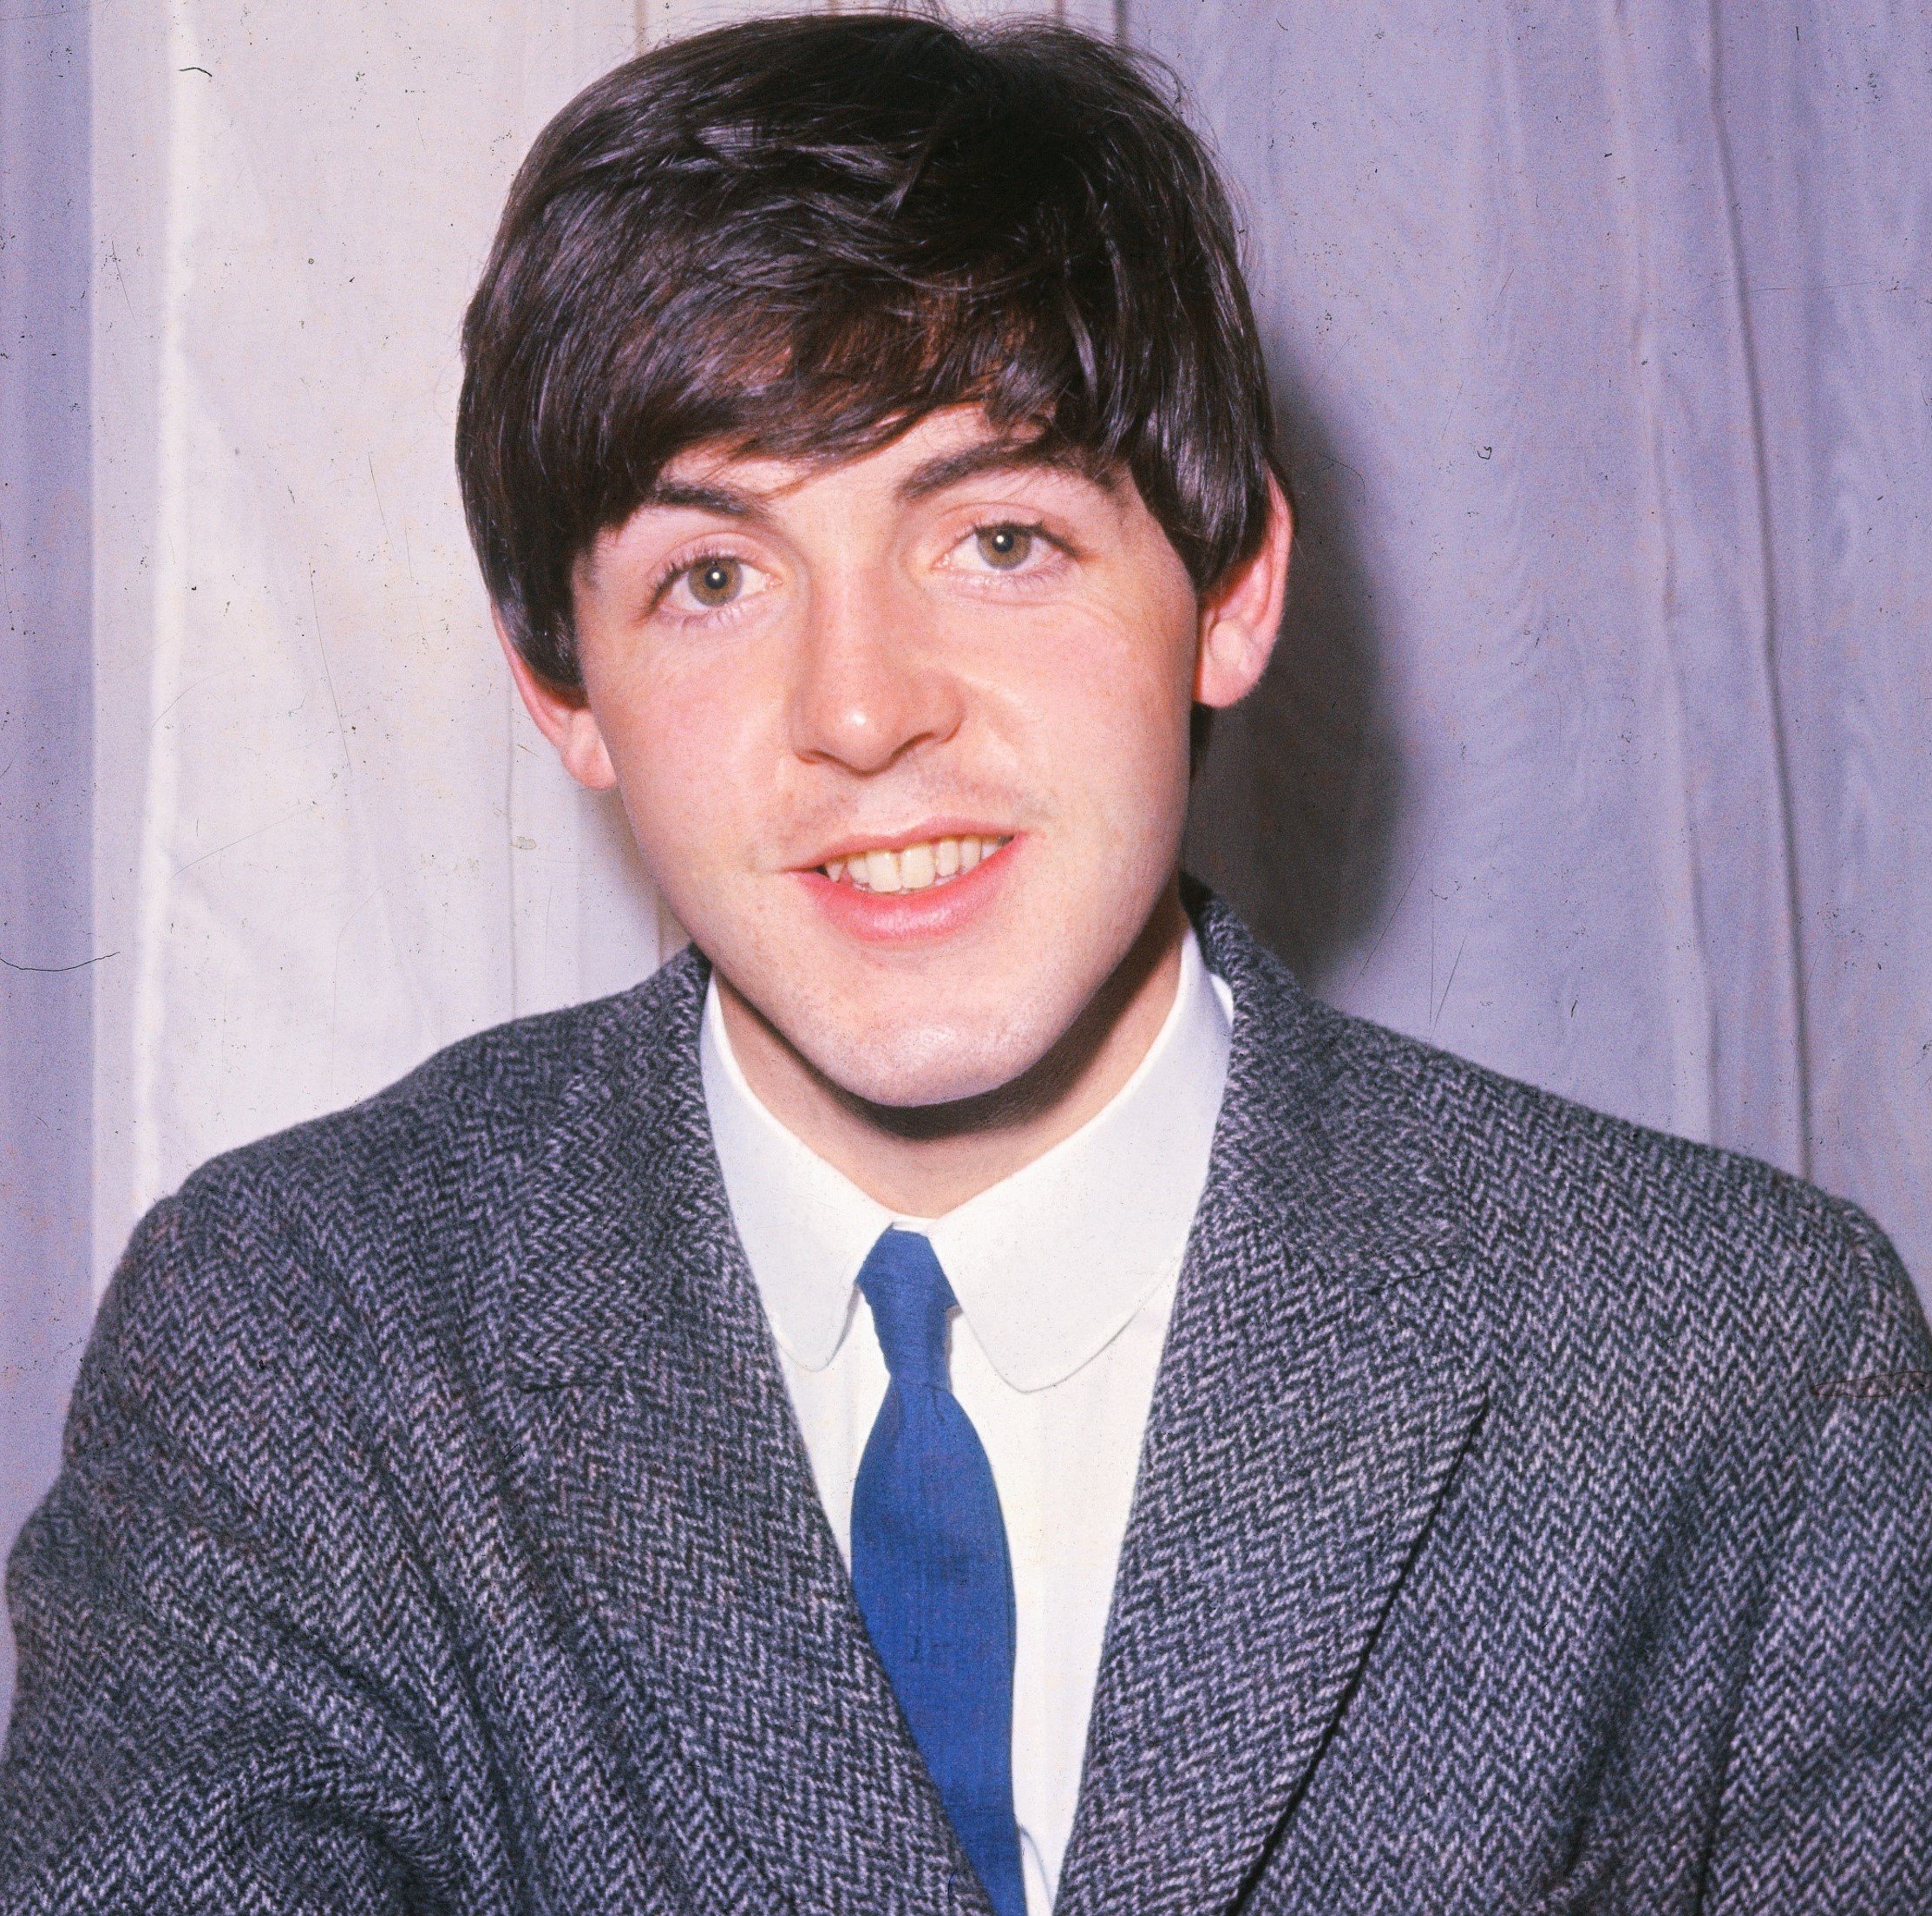 Paul McCartney wearing a suit during The Beatles' "Hey Jude" era